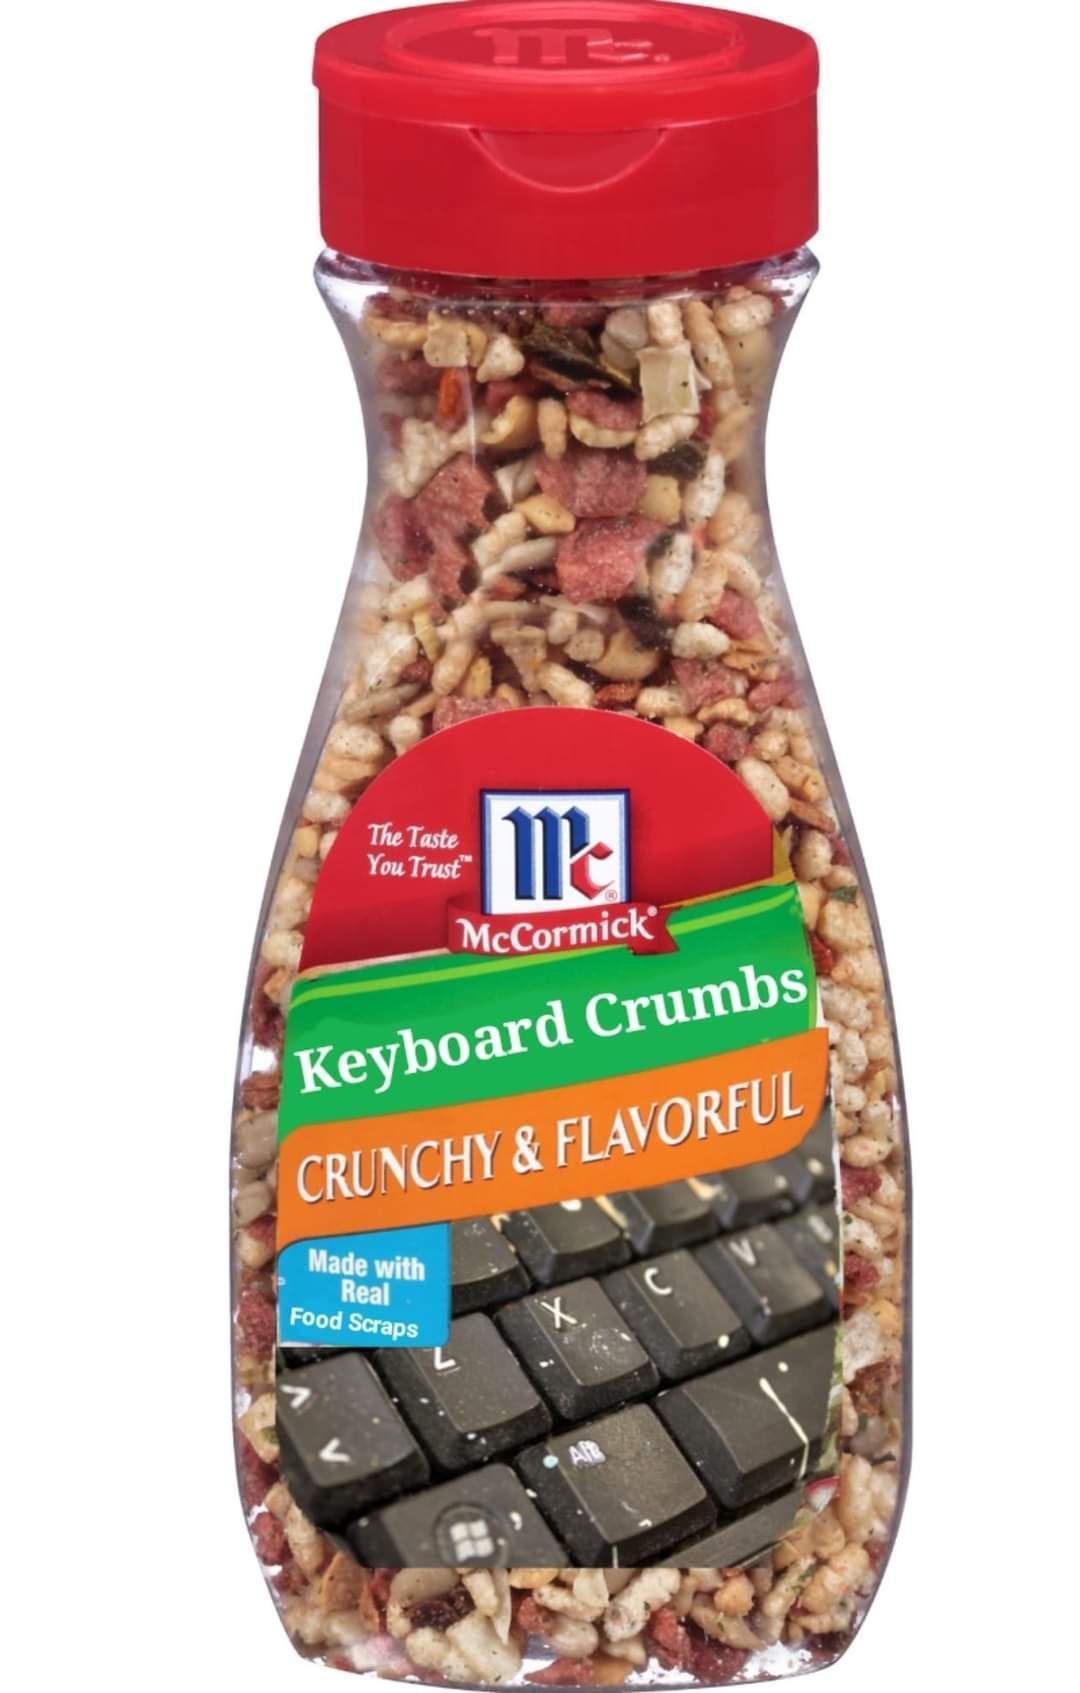 daily dose of randoms - mccormick salad toppings - The Taste You Trust T. me McCormick Made with Real Food Scraps Keyboard Crumbs Crunchy&Flavorful X C